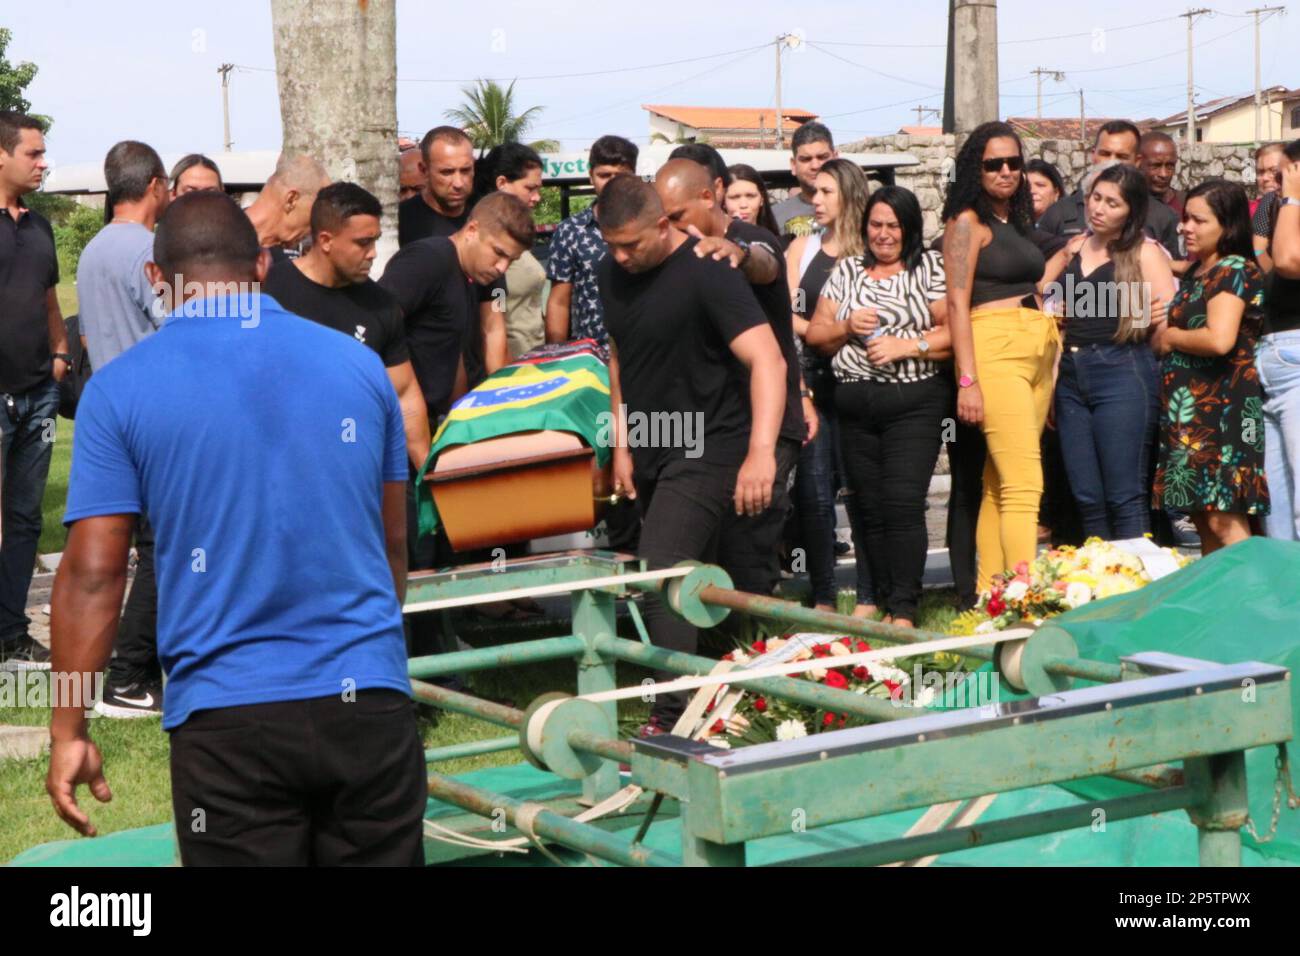 March 7, 2023, Sao Goncalo, Rio de Janeiro, Brasil: (INT) Burial Ceremony of Corporal Artur Virgilio Guia. March 06, 2023, Rio de Janeiro, Brazil: Burial of the body of Military Police Corporal Artur Virgilio Ellena Guarana Guia, 42 years old, on Monday (6) at the Memorial Nycteroy Cemetery park in Sao Goncalo, Metropolitan Region of Rio de Janeiro. The PM died after being run over after getting out of his car after a breakdown in the vehicle. When trying to signal the road, the officer was hit by a car traveling at high speed. The driver fled. (Credit Image: © Jose Lucena/TheNEWS2 via ZUMA Pr Stock Photo